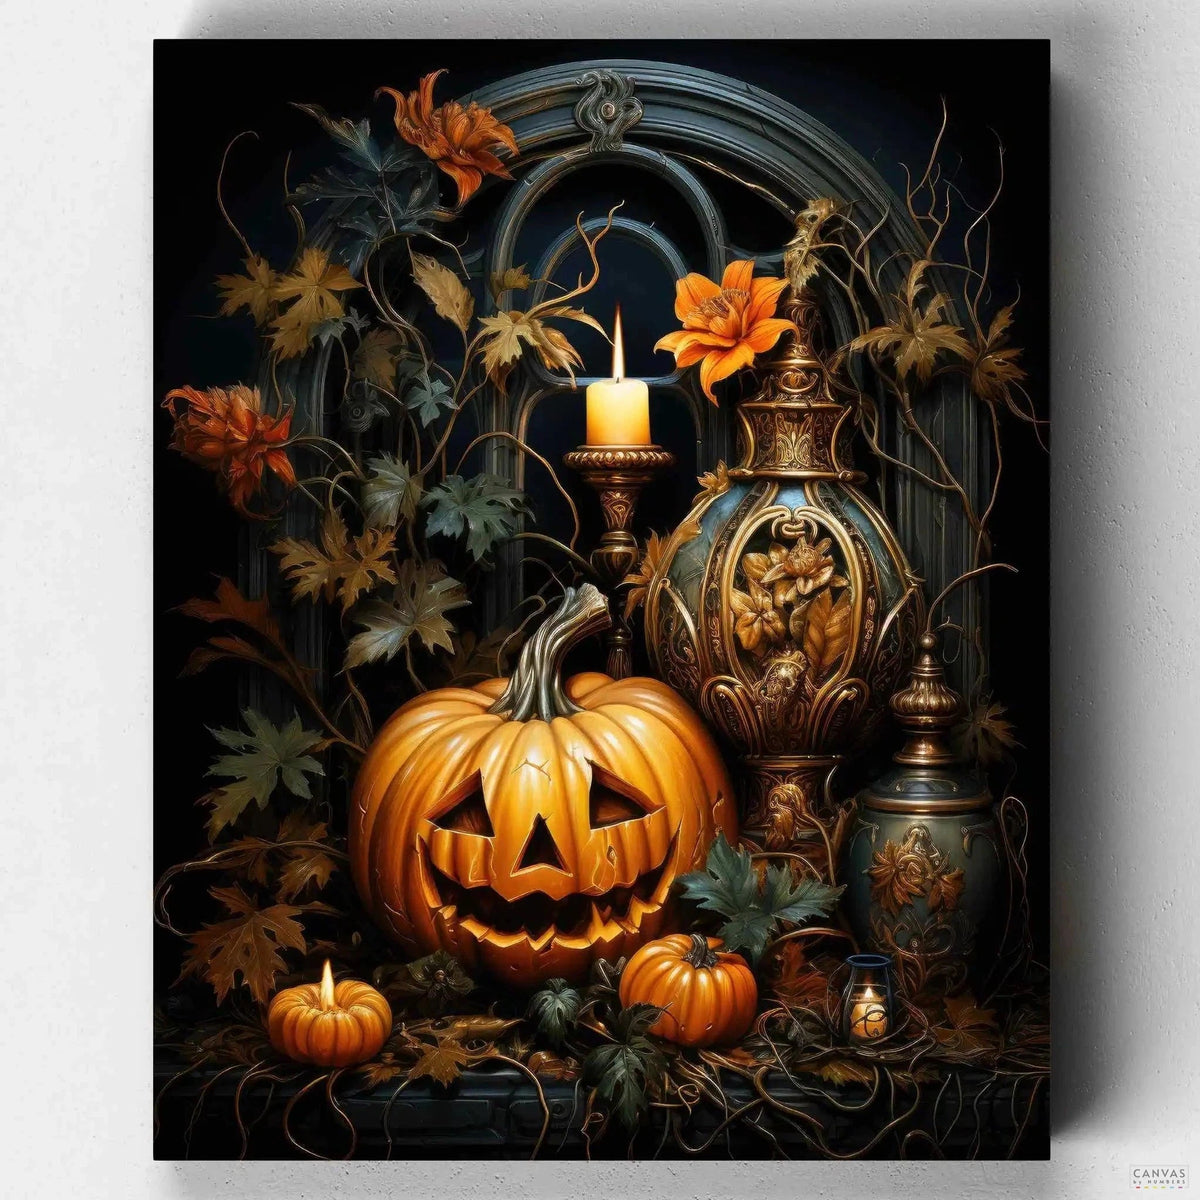 Halloween's Spirit - Paint by Numbers-Paint by Numbers-16"x20" (40x50cm) No Frame-Canvas by Numbers US